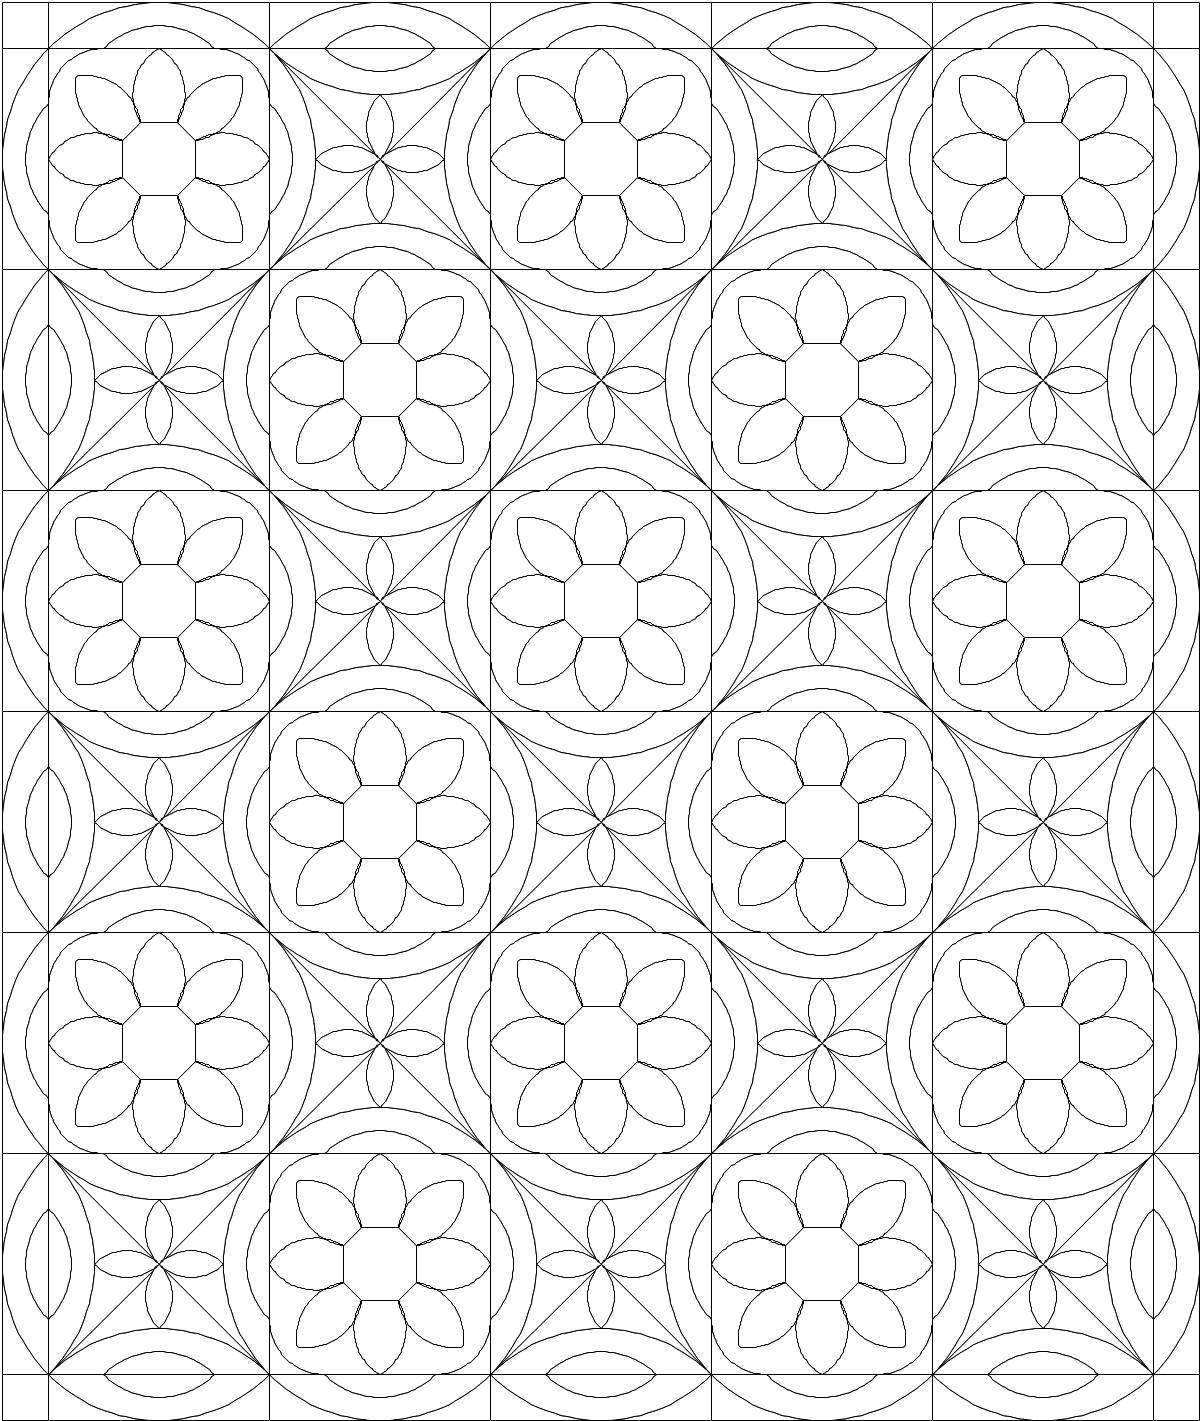 Coloring Simple pattern. Category patterns. Tags:  Patterns, geometric.